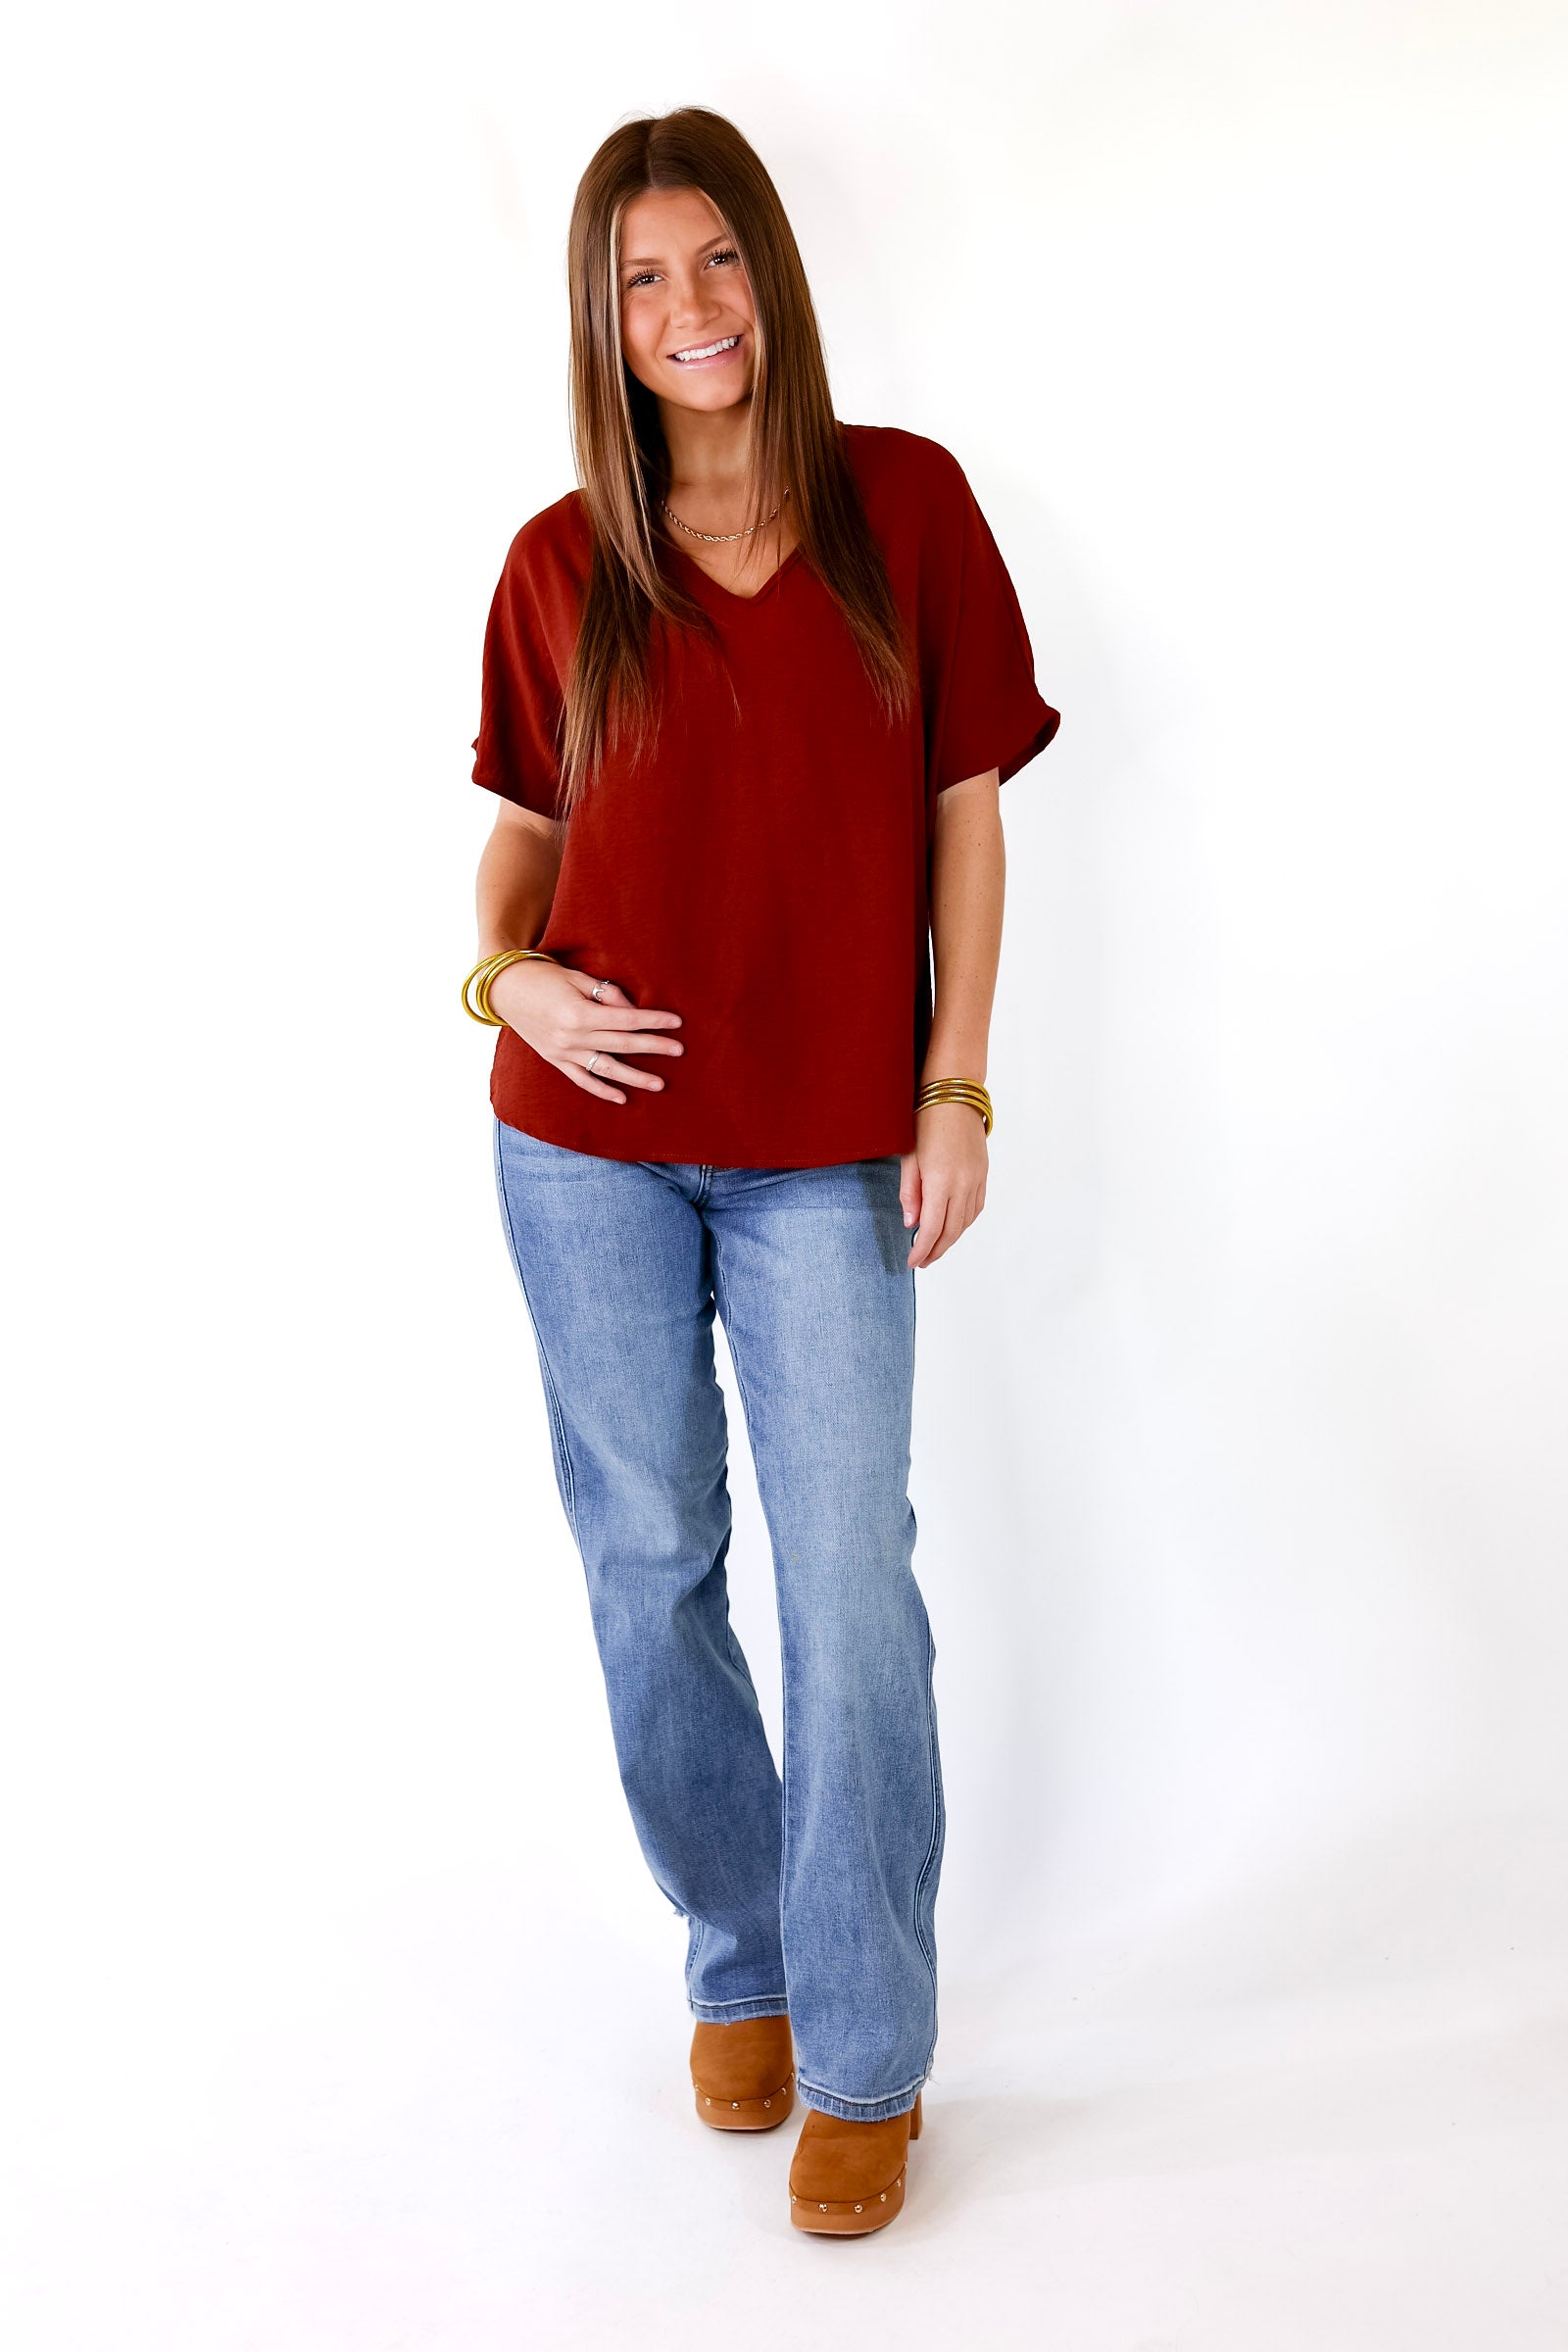 Lovely Dear V Neck Short Sleeve Solid Top in Rust Brown - Giddy Up Glamour Boutique